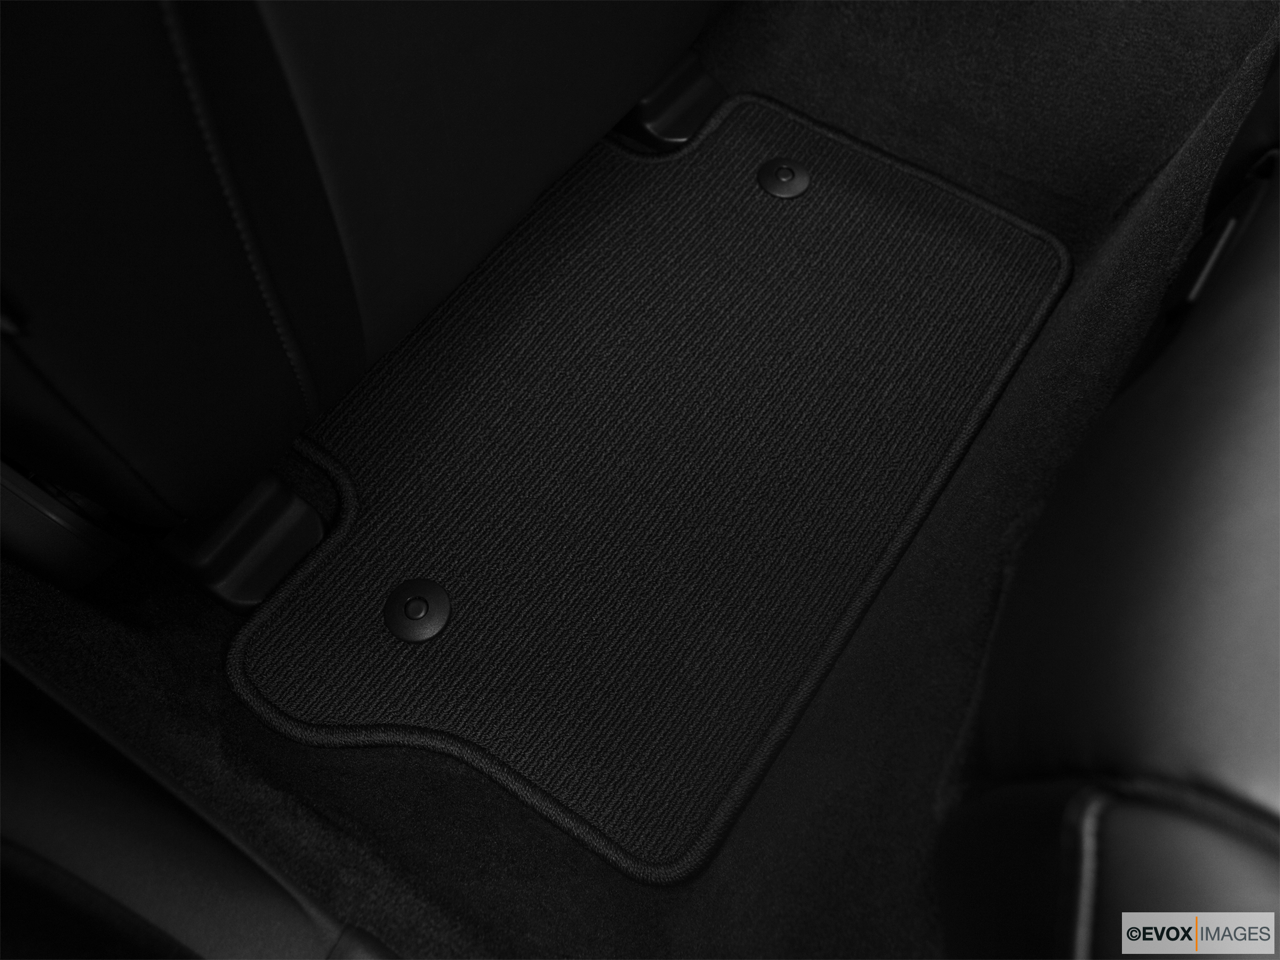 2010 Volvo V70 3.2 A SR Rear driver's side floor mat. Mid-seat level from outside looking in. 